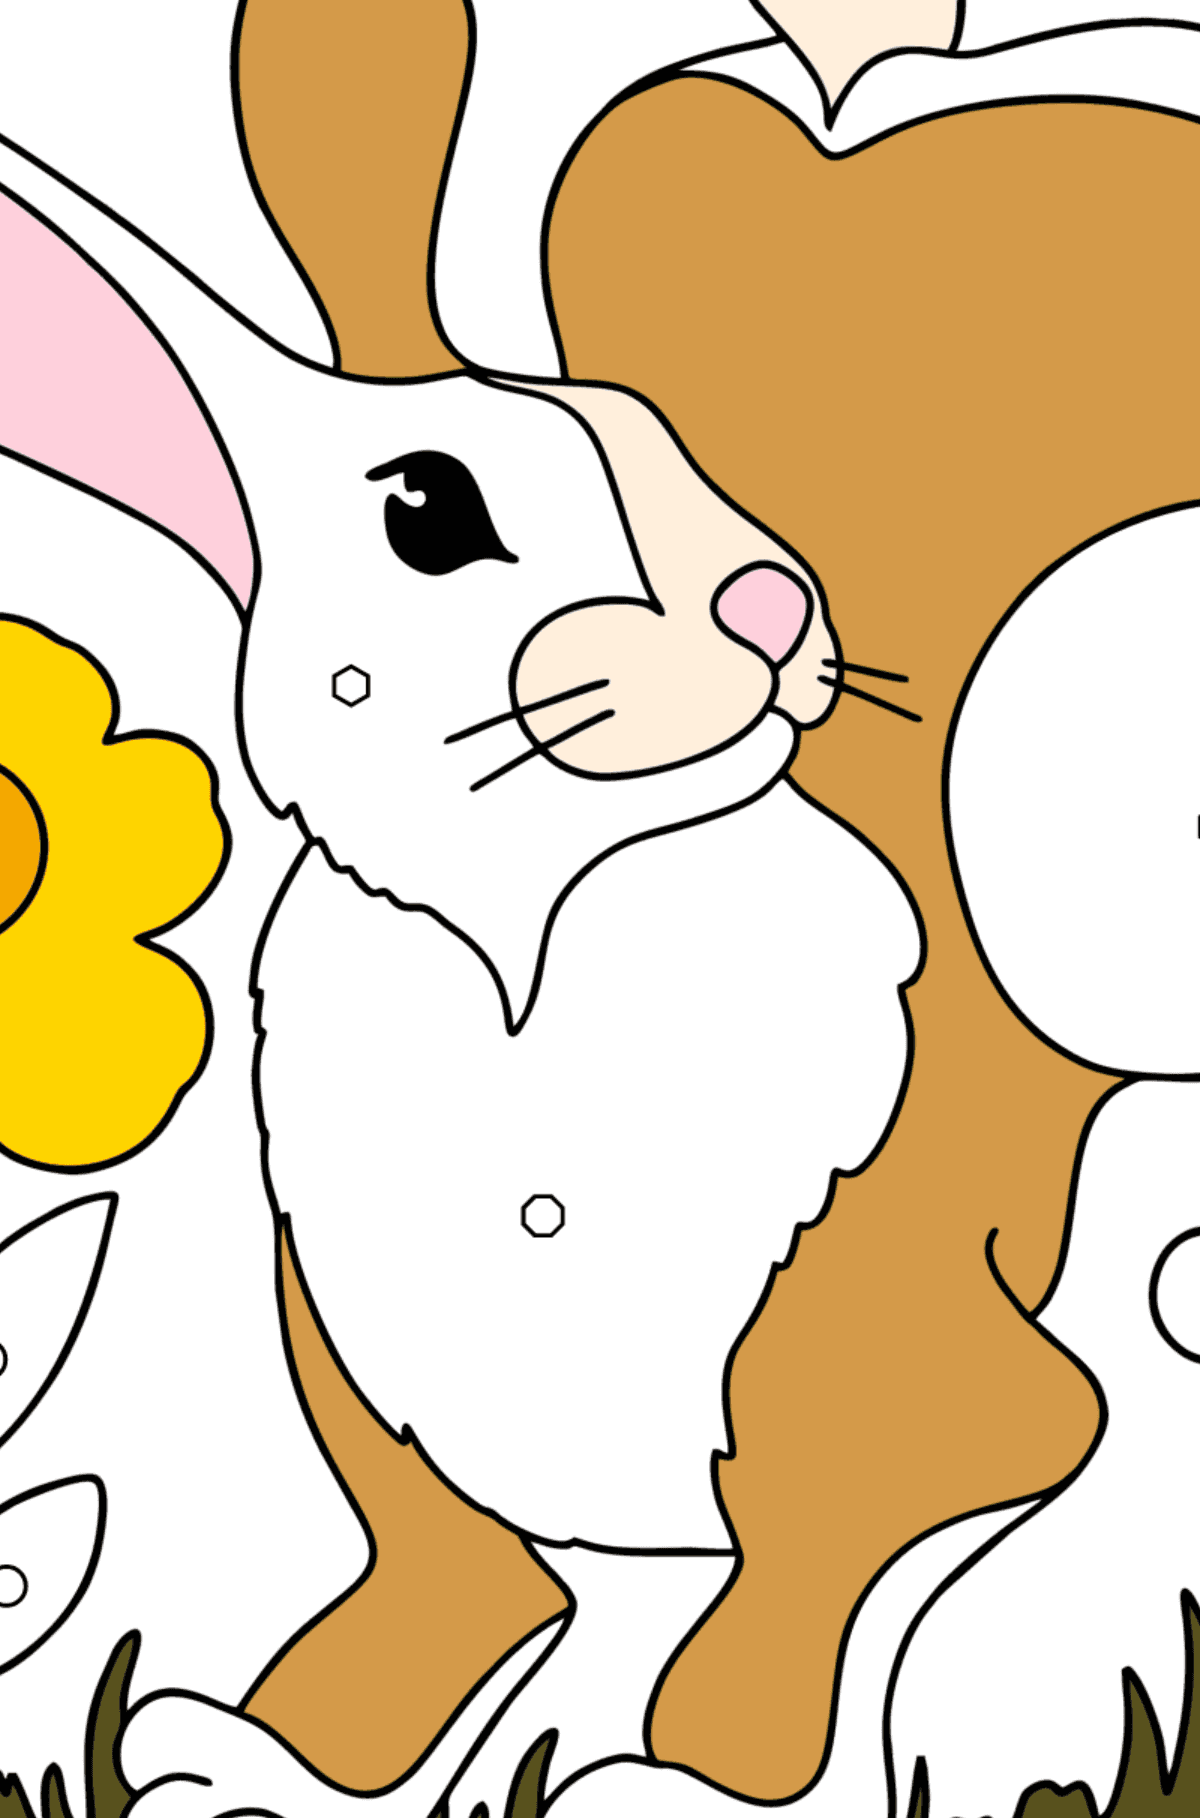 Cute Rabbit coloring page - Coloring by Geometric Shapes for Kids